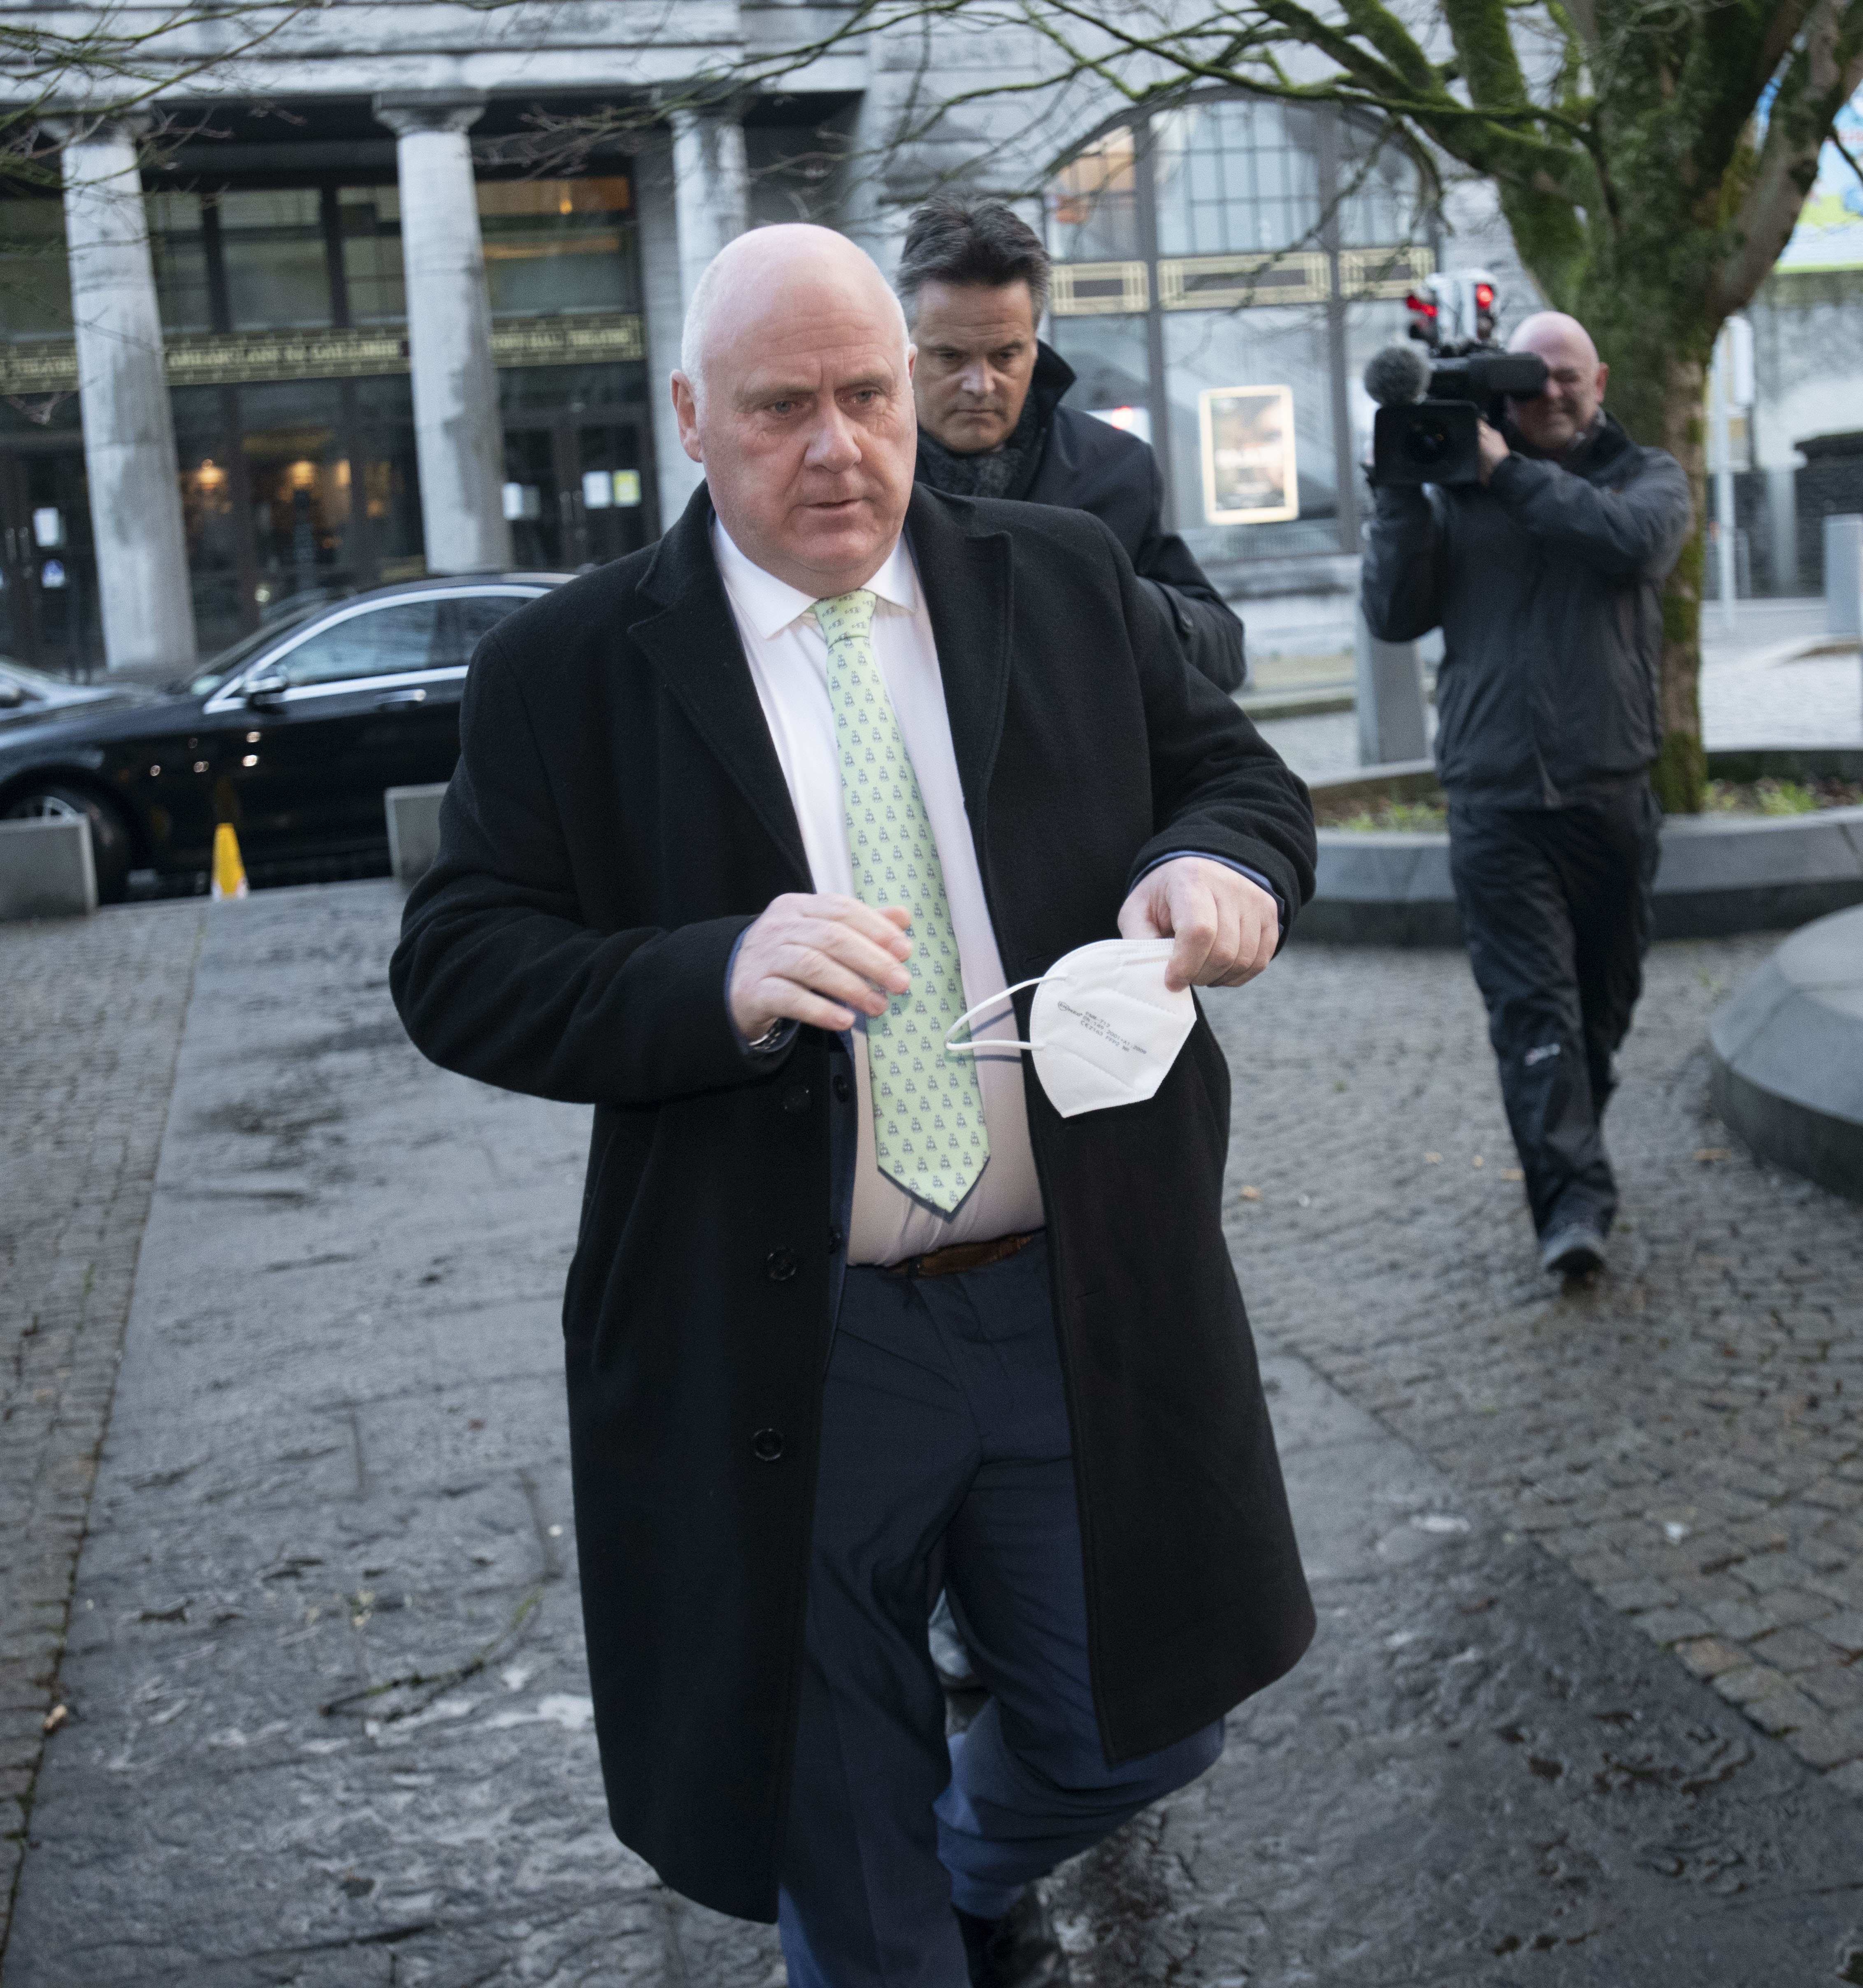 Galway East Independent TD Noel Grealish, 55, leaves Galway District Court after attending a hearing where he is one of four people accused to have breached Covid restrictions by organising a golf society dinner (PA)